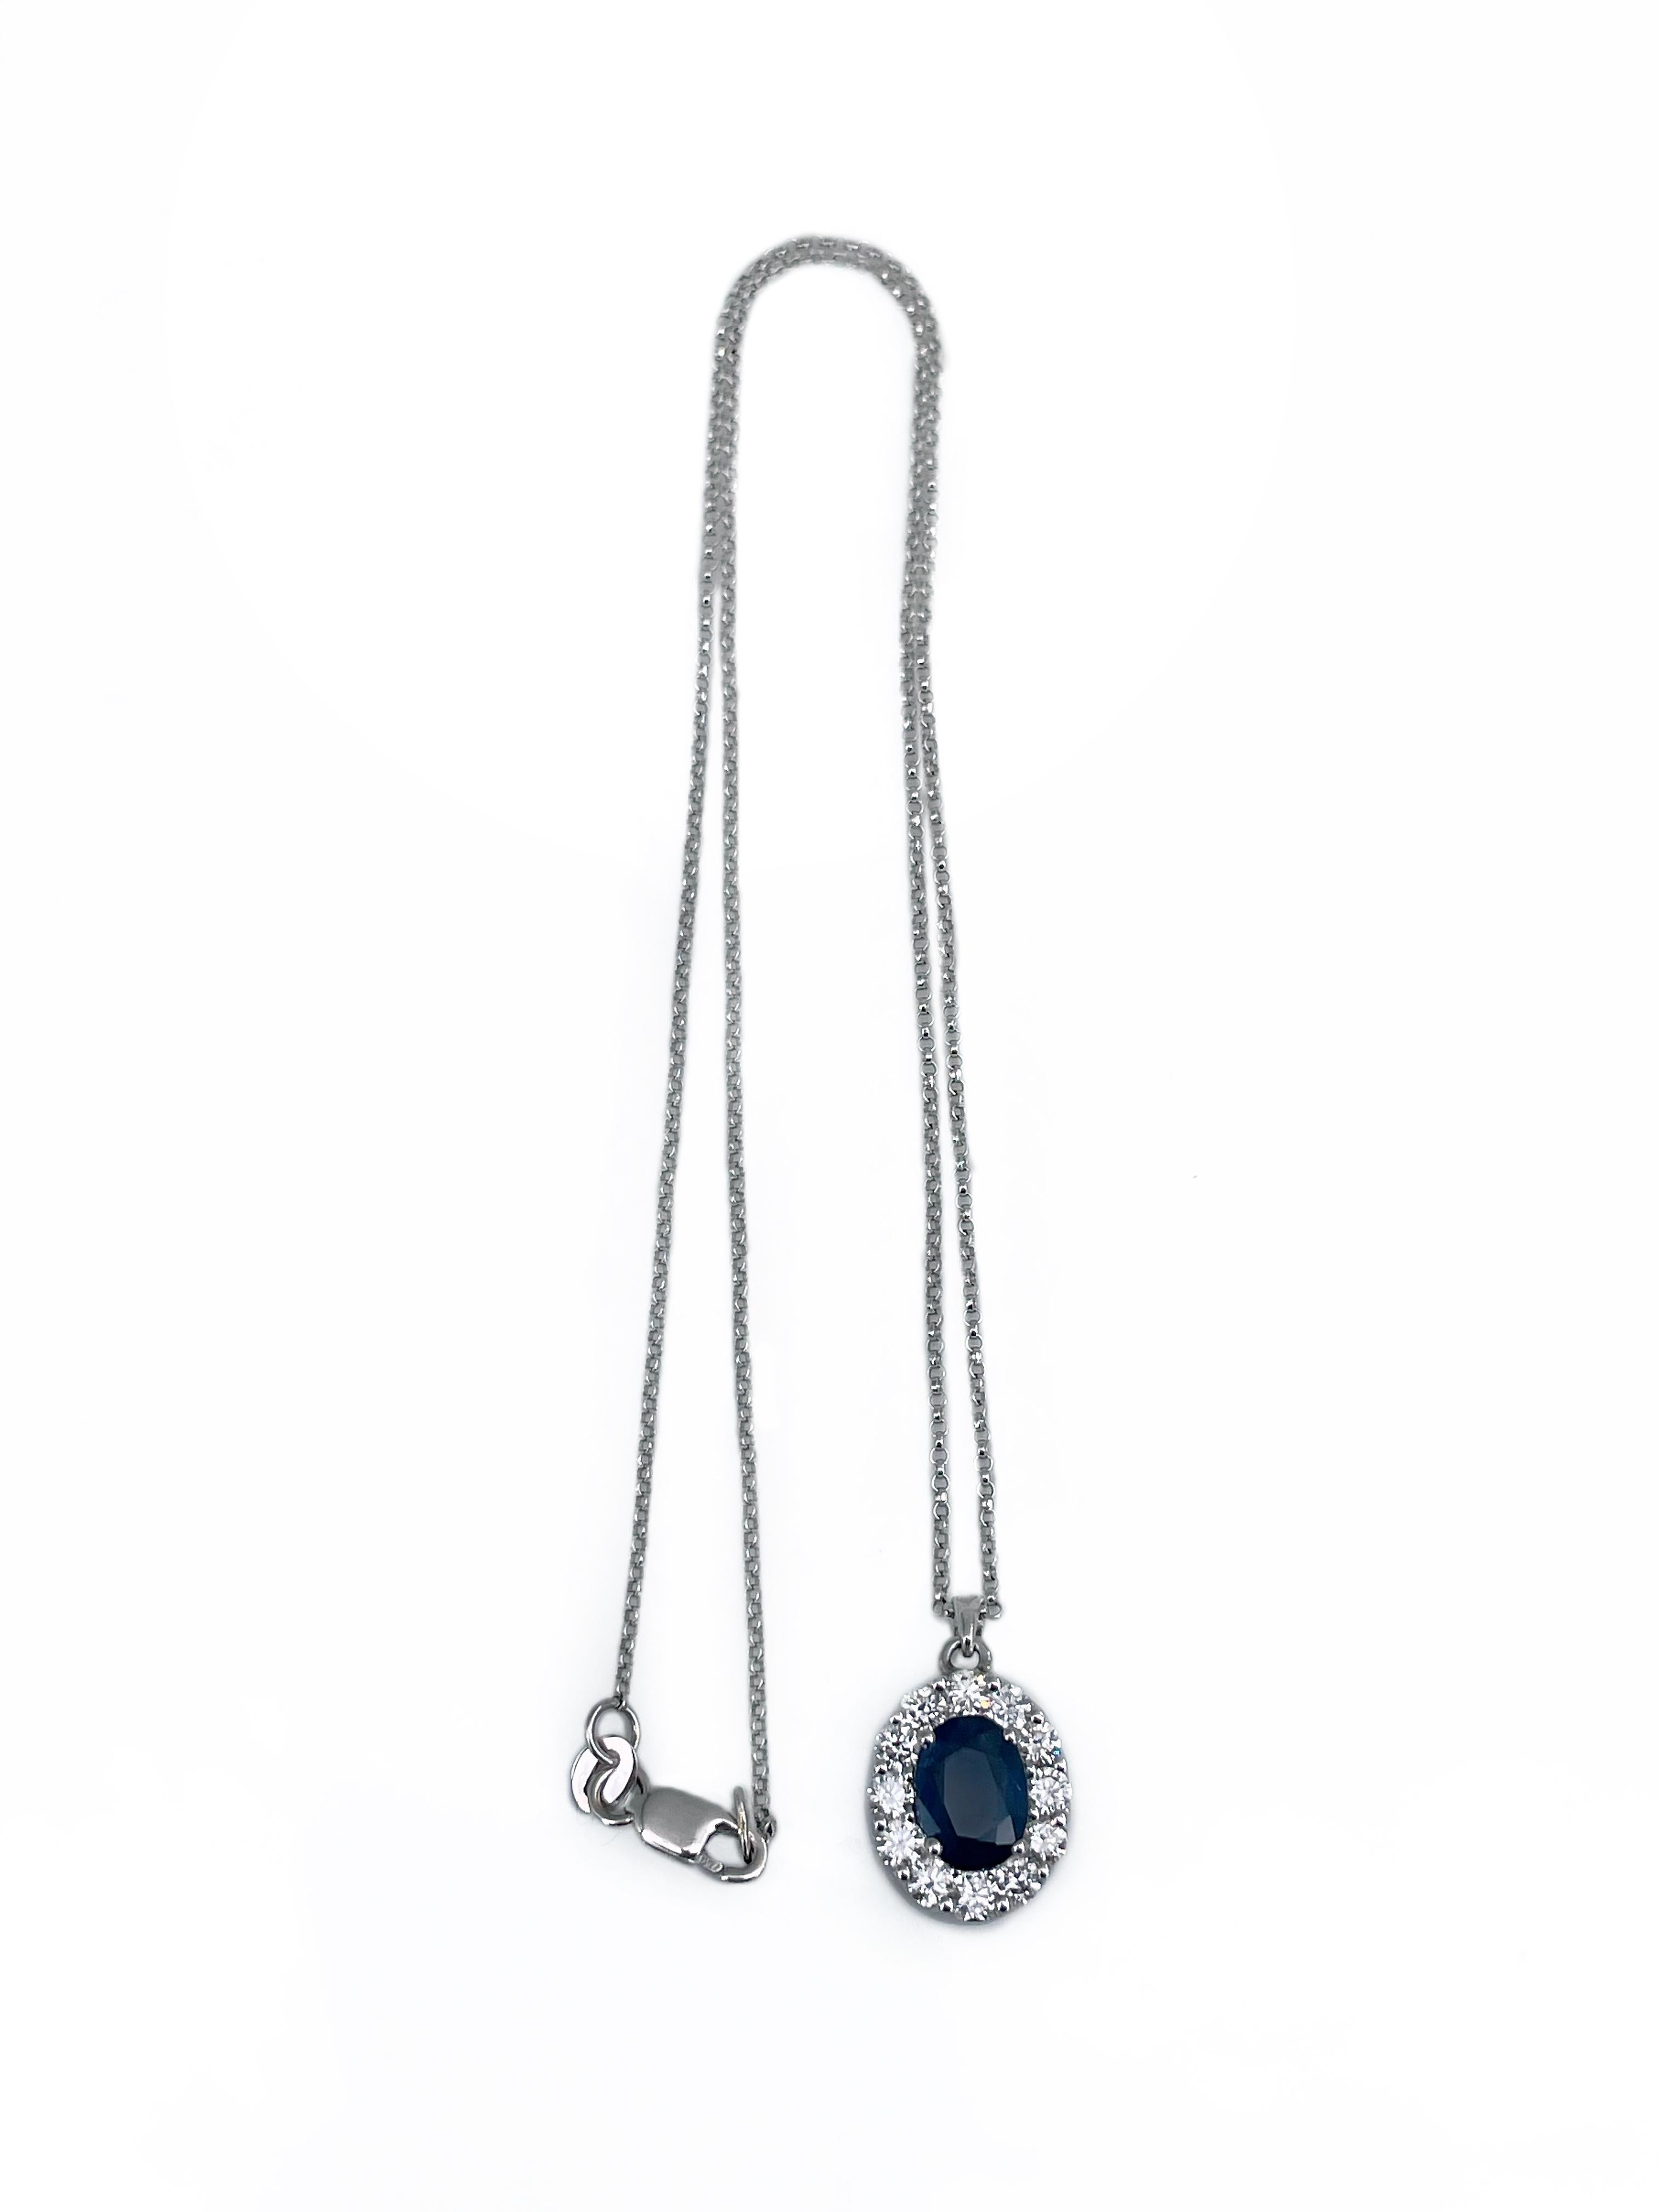 This is a modern design pendant with a chain crafted in 18K white gold. Circa 2000. 

The piece features:
- 1 sapphire (oval cut, 1.80ct, B 7/3, P2)
- 12 diamonds (round brilliant cut, TW 0.60ct, RW-W, VS-SI)

Weight: 4.33g
Pendant length: